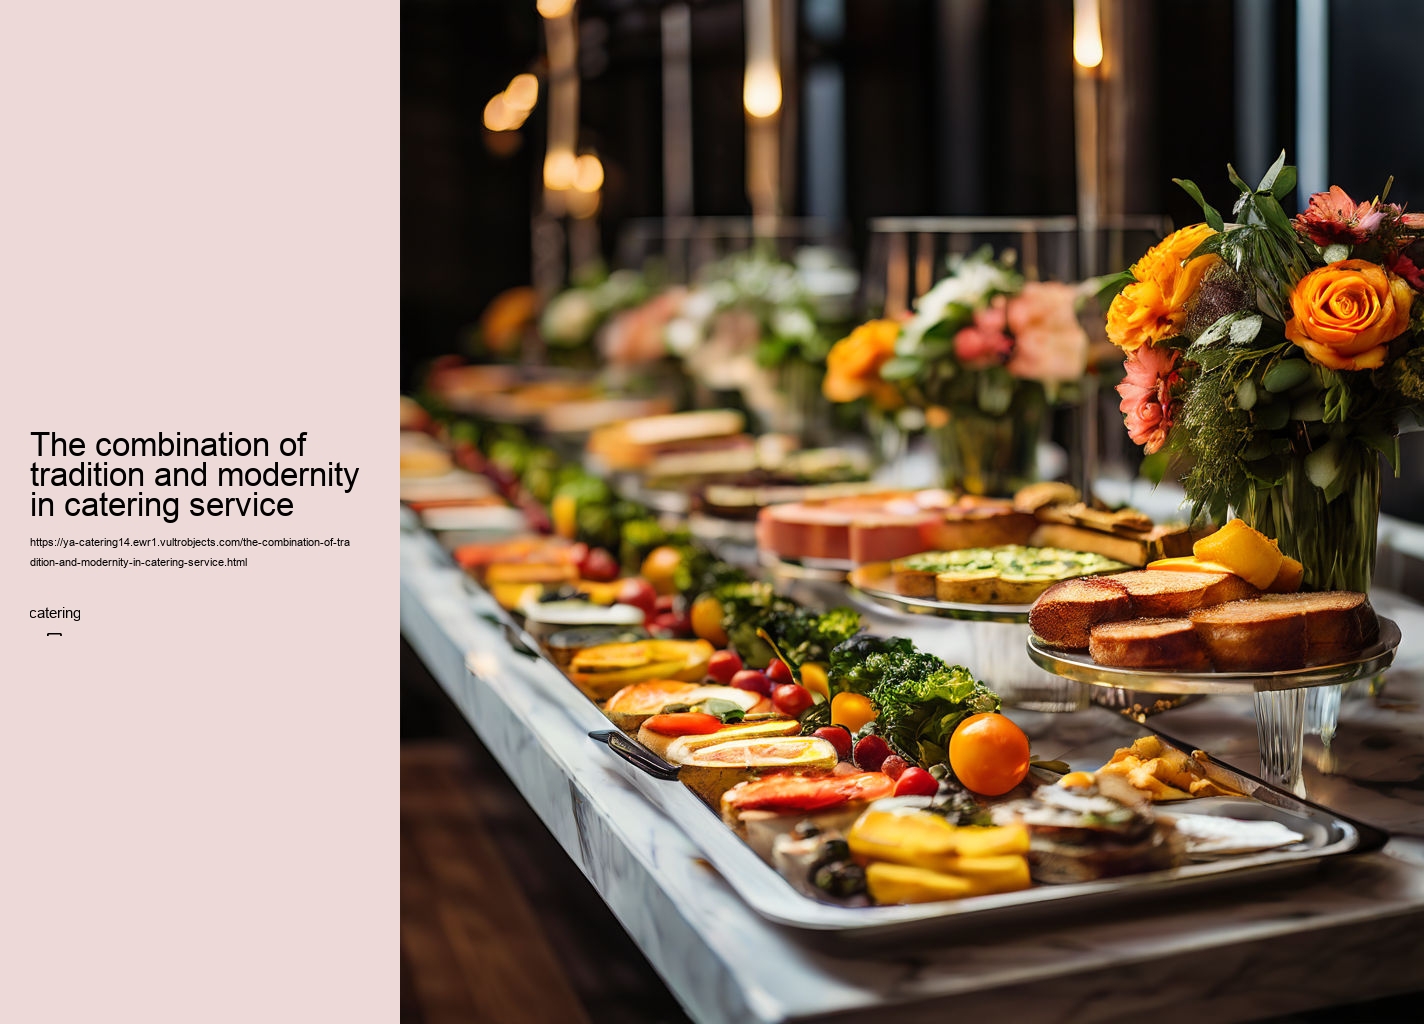 The combination of tradition and modernity in catering service